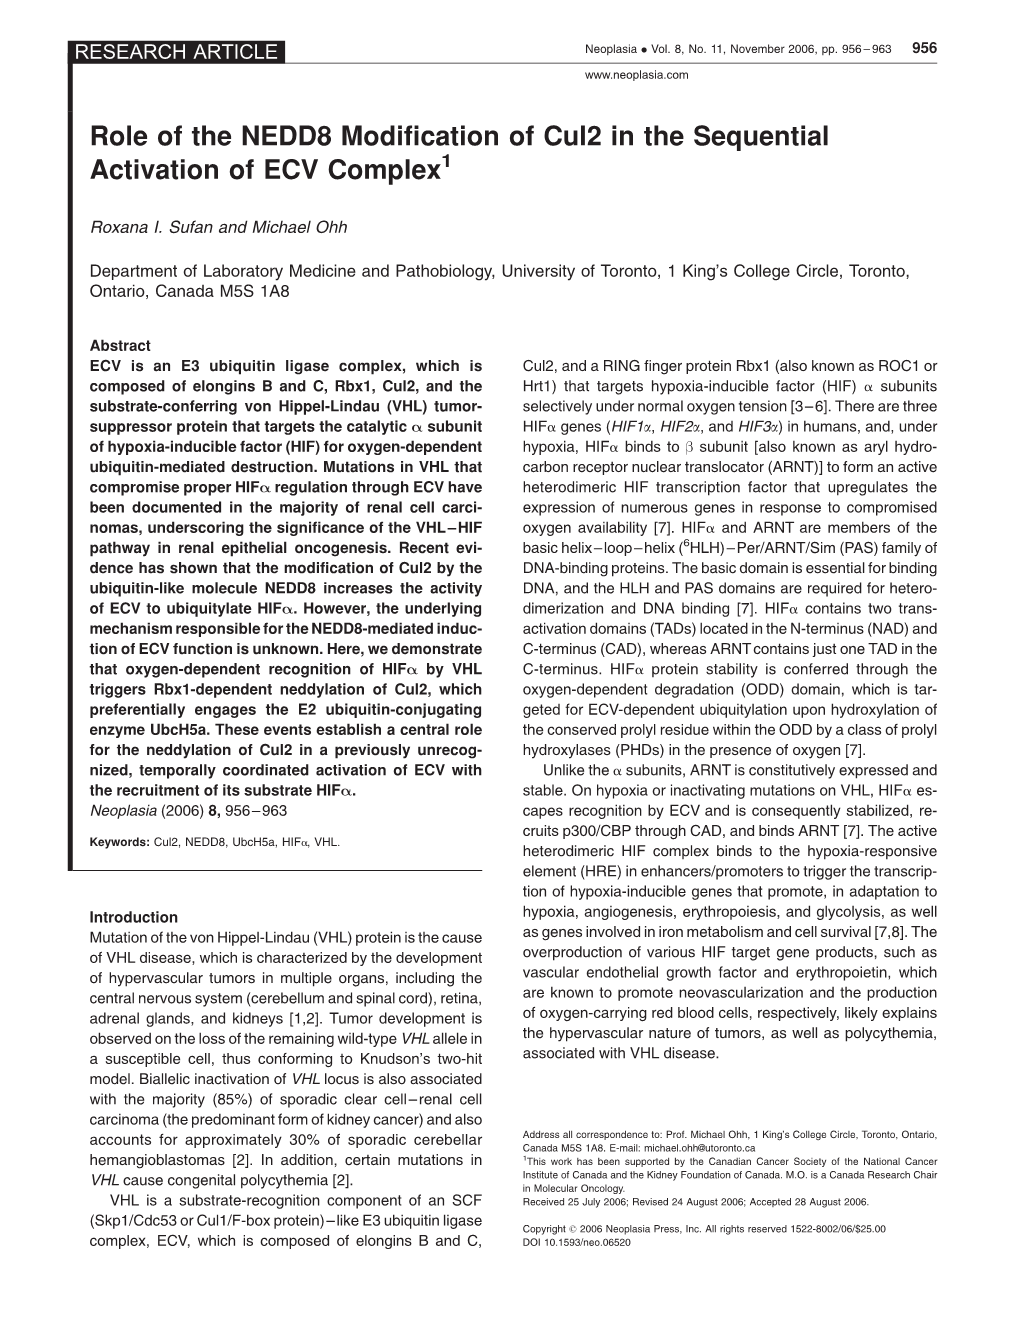 Role of the NEDD8 Modification of Cul2 in the Sequential Activation of ECV Complex1